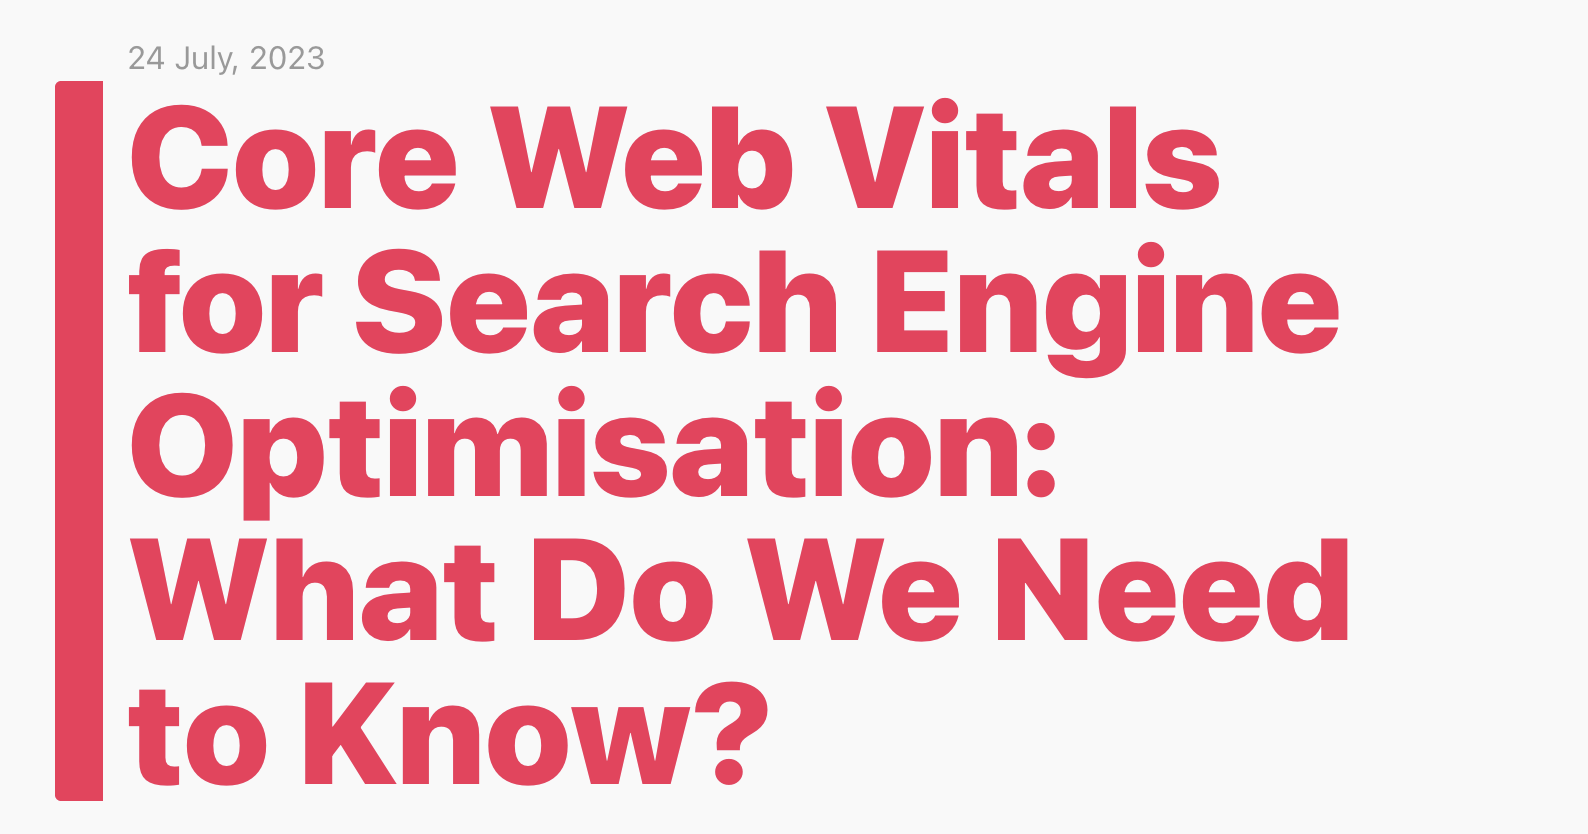 Core Web Vitals for Search Engine Optimisation: What Do We Need to Know?